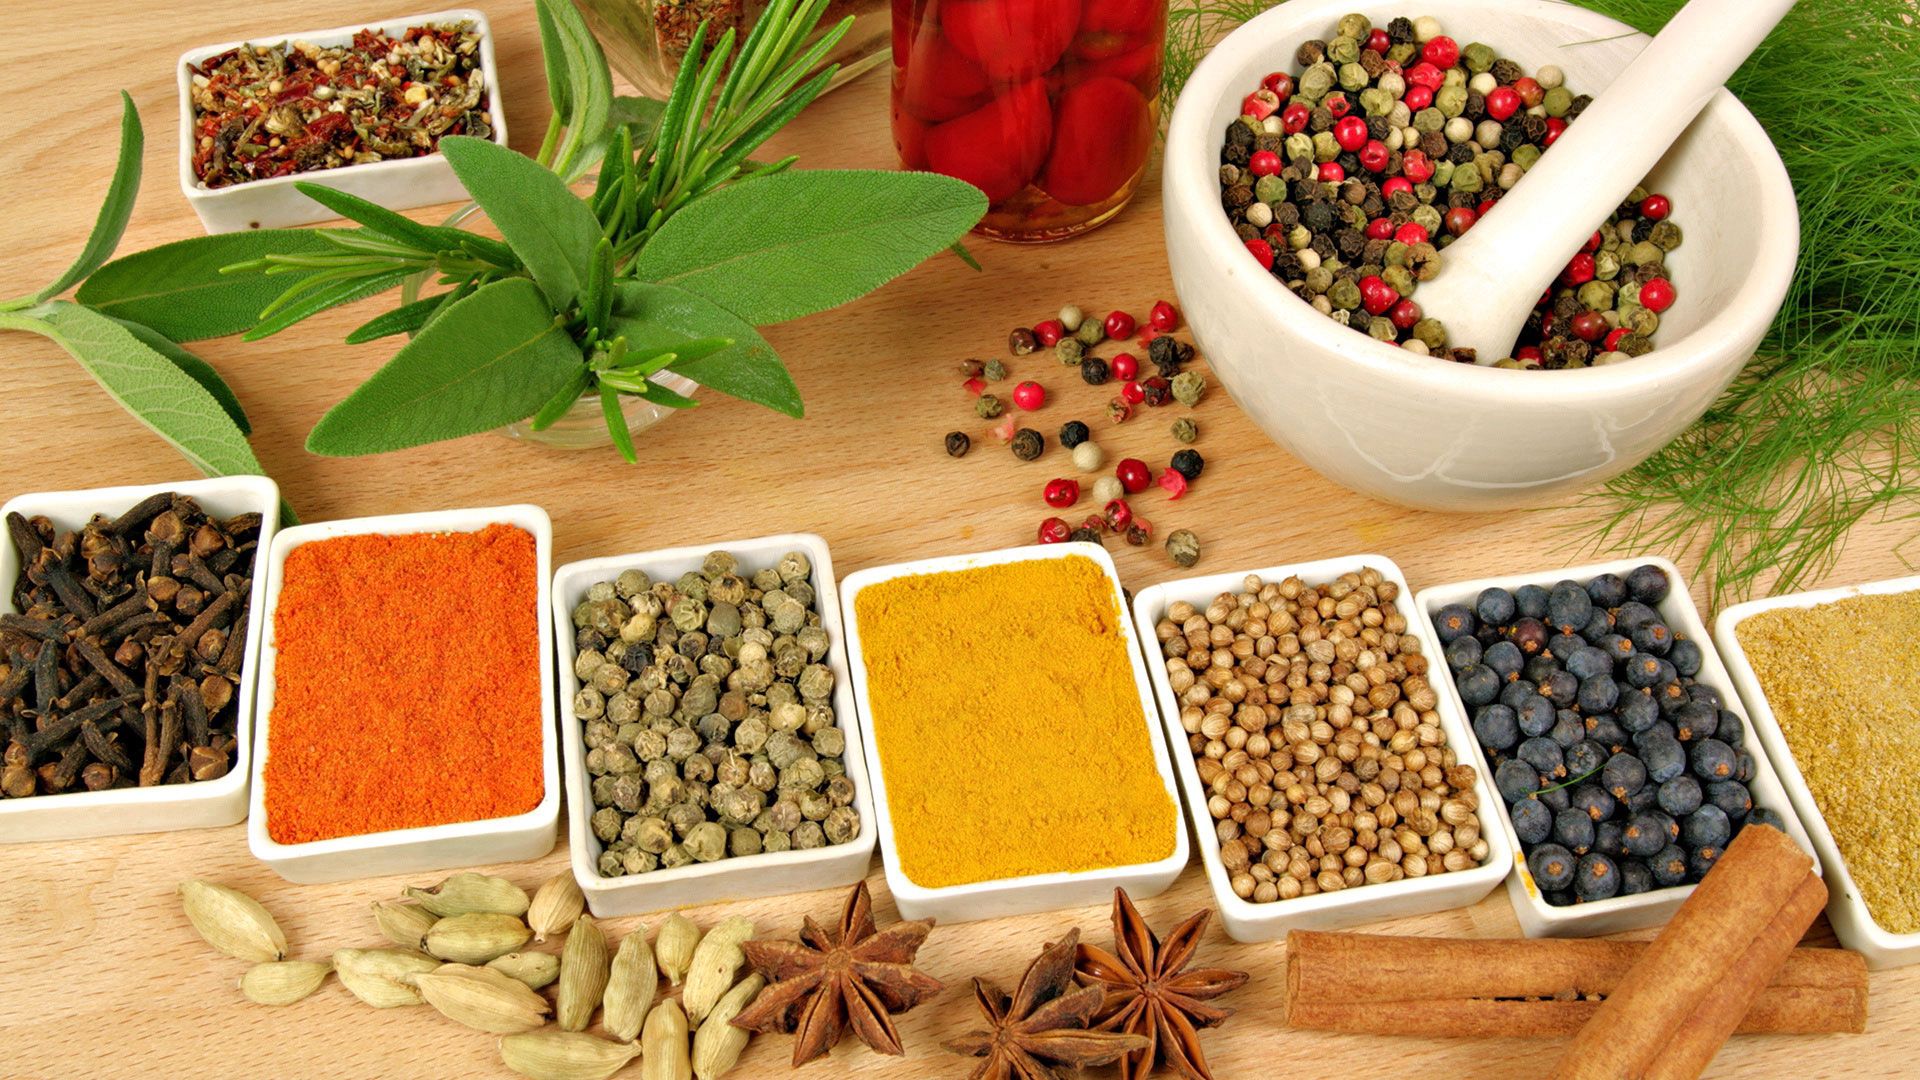 Popular Spices images for mobile phone